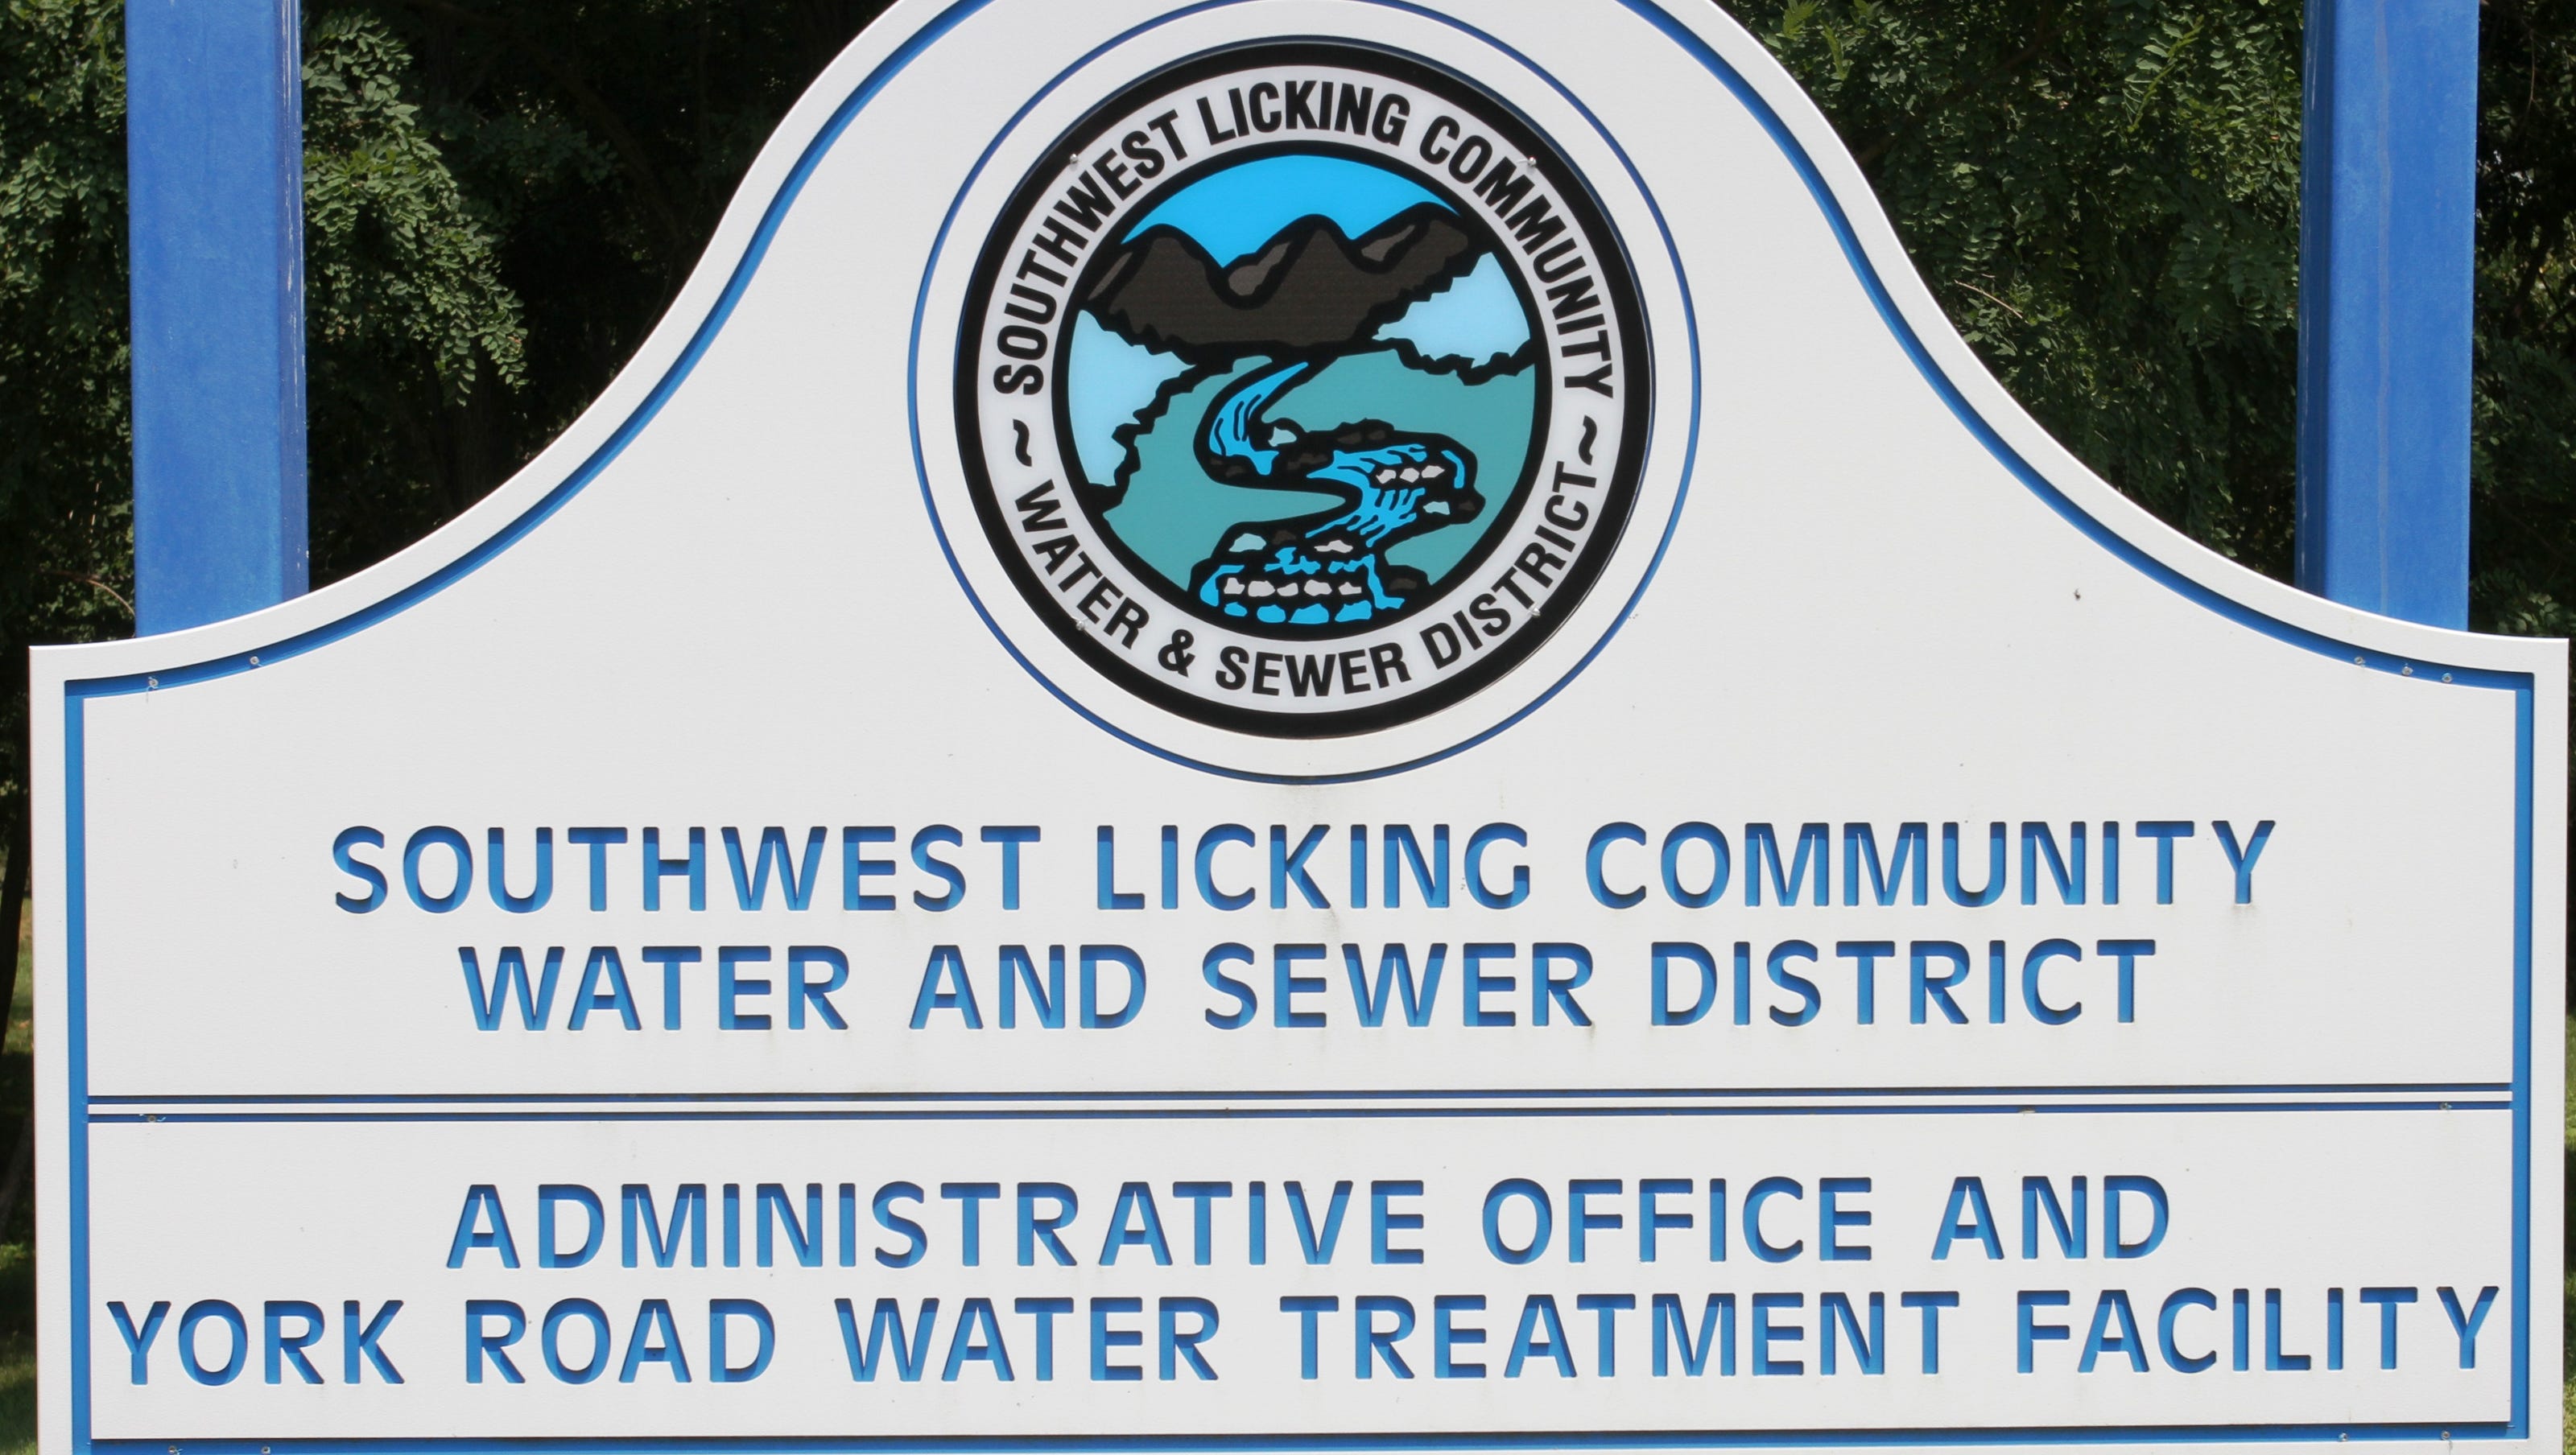  Pataskala seeks more applicants for Southwest Licking Community Water and Sewer board seat 